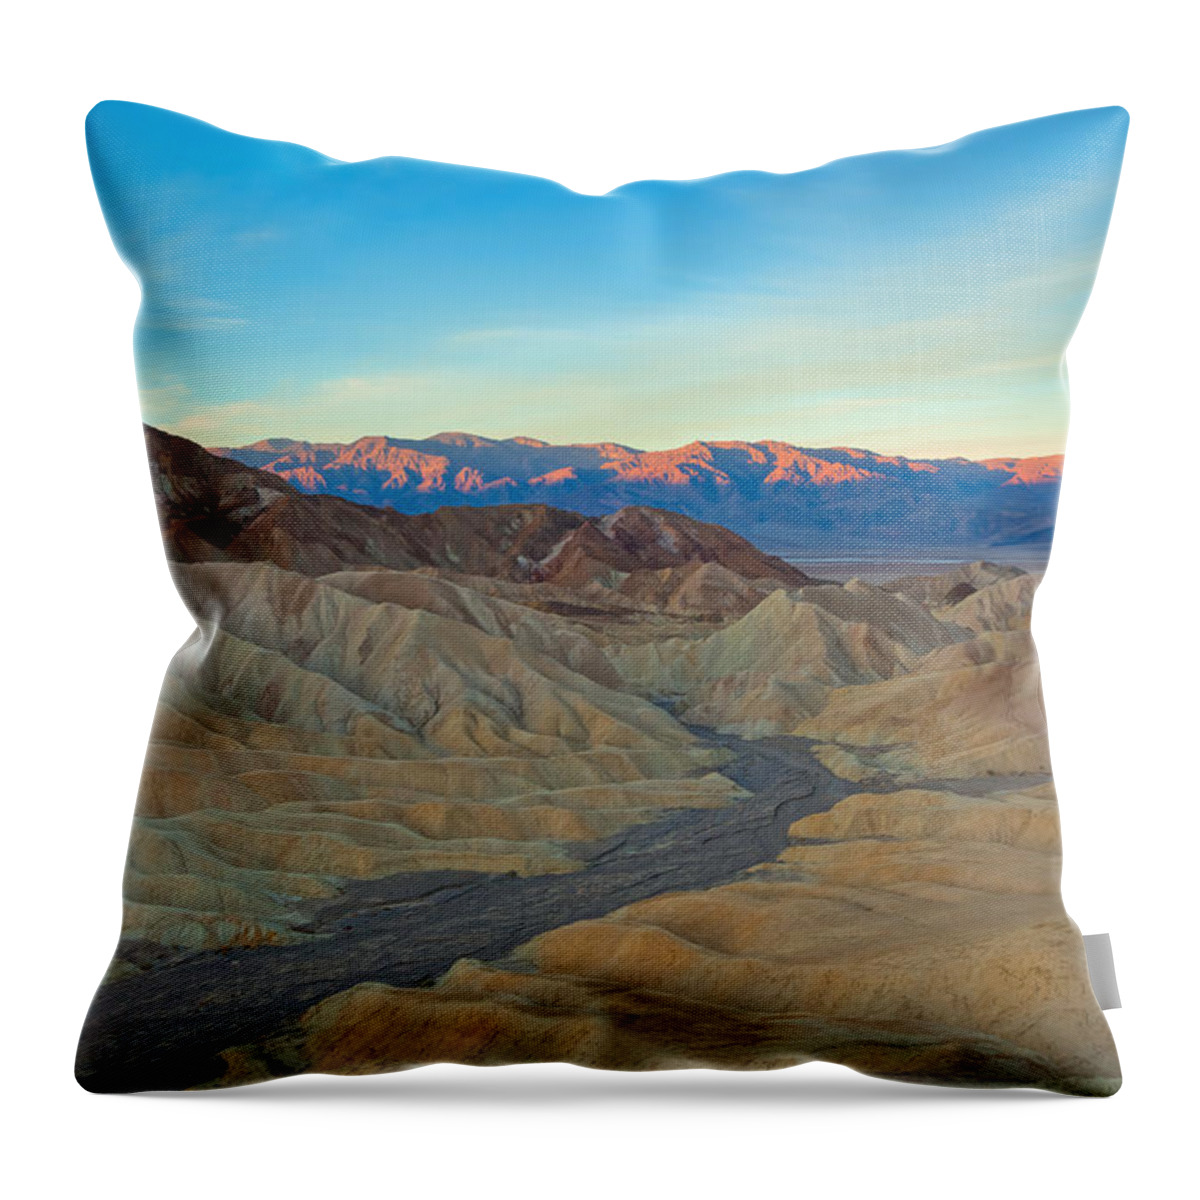 Landscape Throw Pillow featuring the photograph Road To The Valley by Jonathan Nguyen